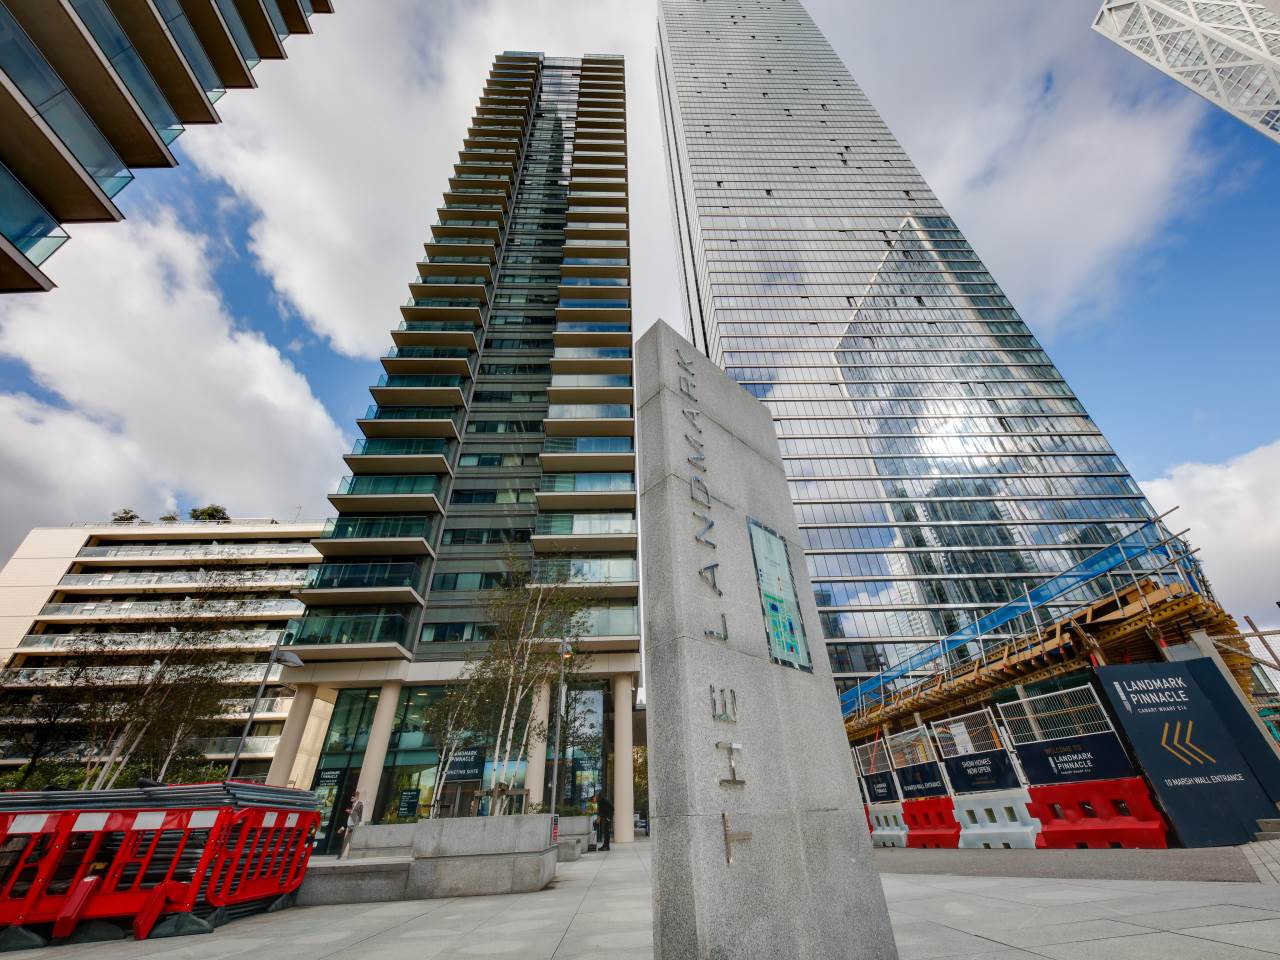 This spacious 2 bedroom, 2 bedroom 5th Floor apartment located with Landmark West Tower just a few minutes walk to Canary Wharf.The property consists of open plan kitchen and living room, 2 bedrooms, 2 luxurious bathrooms (en-suite to master bedroom) and balcony with excellent views. Wooden flooring throughout, with carpeted bedrooms and video entry system.The development is host to private resident facilities including a 24hr concierge & gymnasium.992 Years Remaining On Lease
Service Charge: £2900.00 per 6 months
Ground Rent: £750 per annum